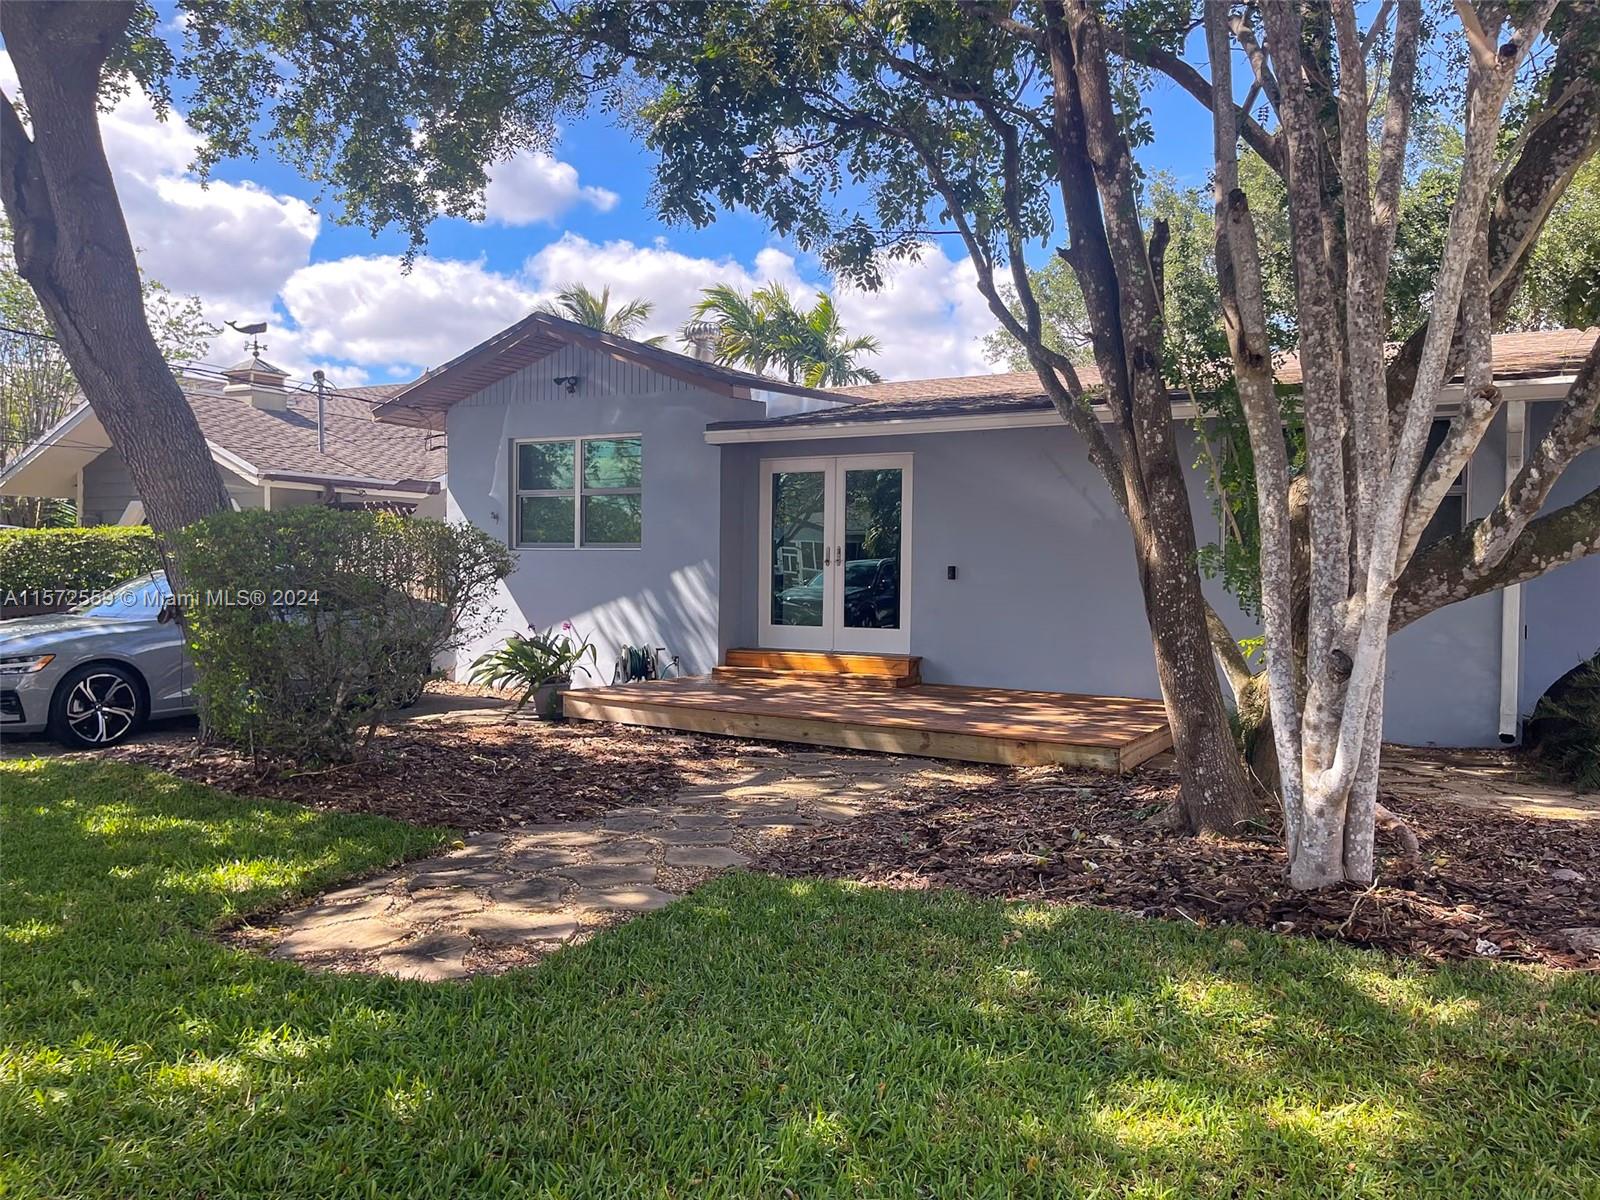 Beautiful and cozy home in desirable Palmetto Bay! This home features an additional 4th convertible bedroom perfect for a nursery or a guest room. New floors and paint throughout all done in the past 6 months give this home a fresh and clean edge.  There are many updated features, newer bathrooms and updated roof  - 2020 Main roof / 2018 flat portion of roof, Impact windows except in family room which have shutters. This house comes with a gasoline back up generator & new security system a large shed with power that has lots of space for storage. Landscaping and driveway have been recently done. This is a very safe and quiet neighborhood, located in a great school district and is only a few minutes from Coral Reef park and  Palmetto Golf course.  Easy to show through Showing Assist.